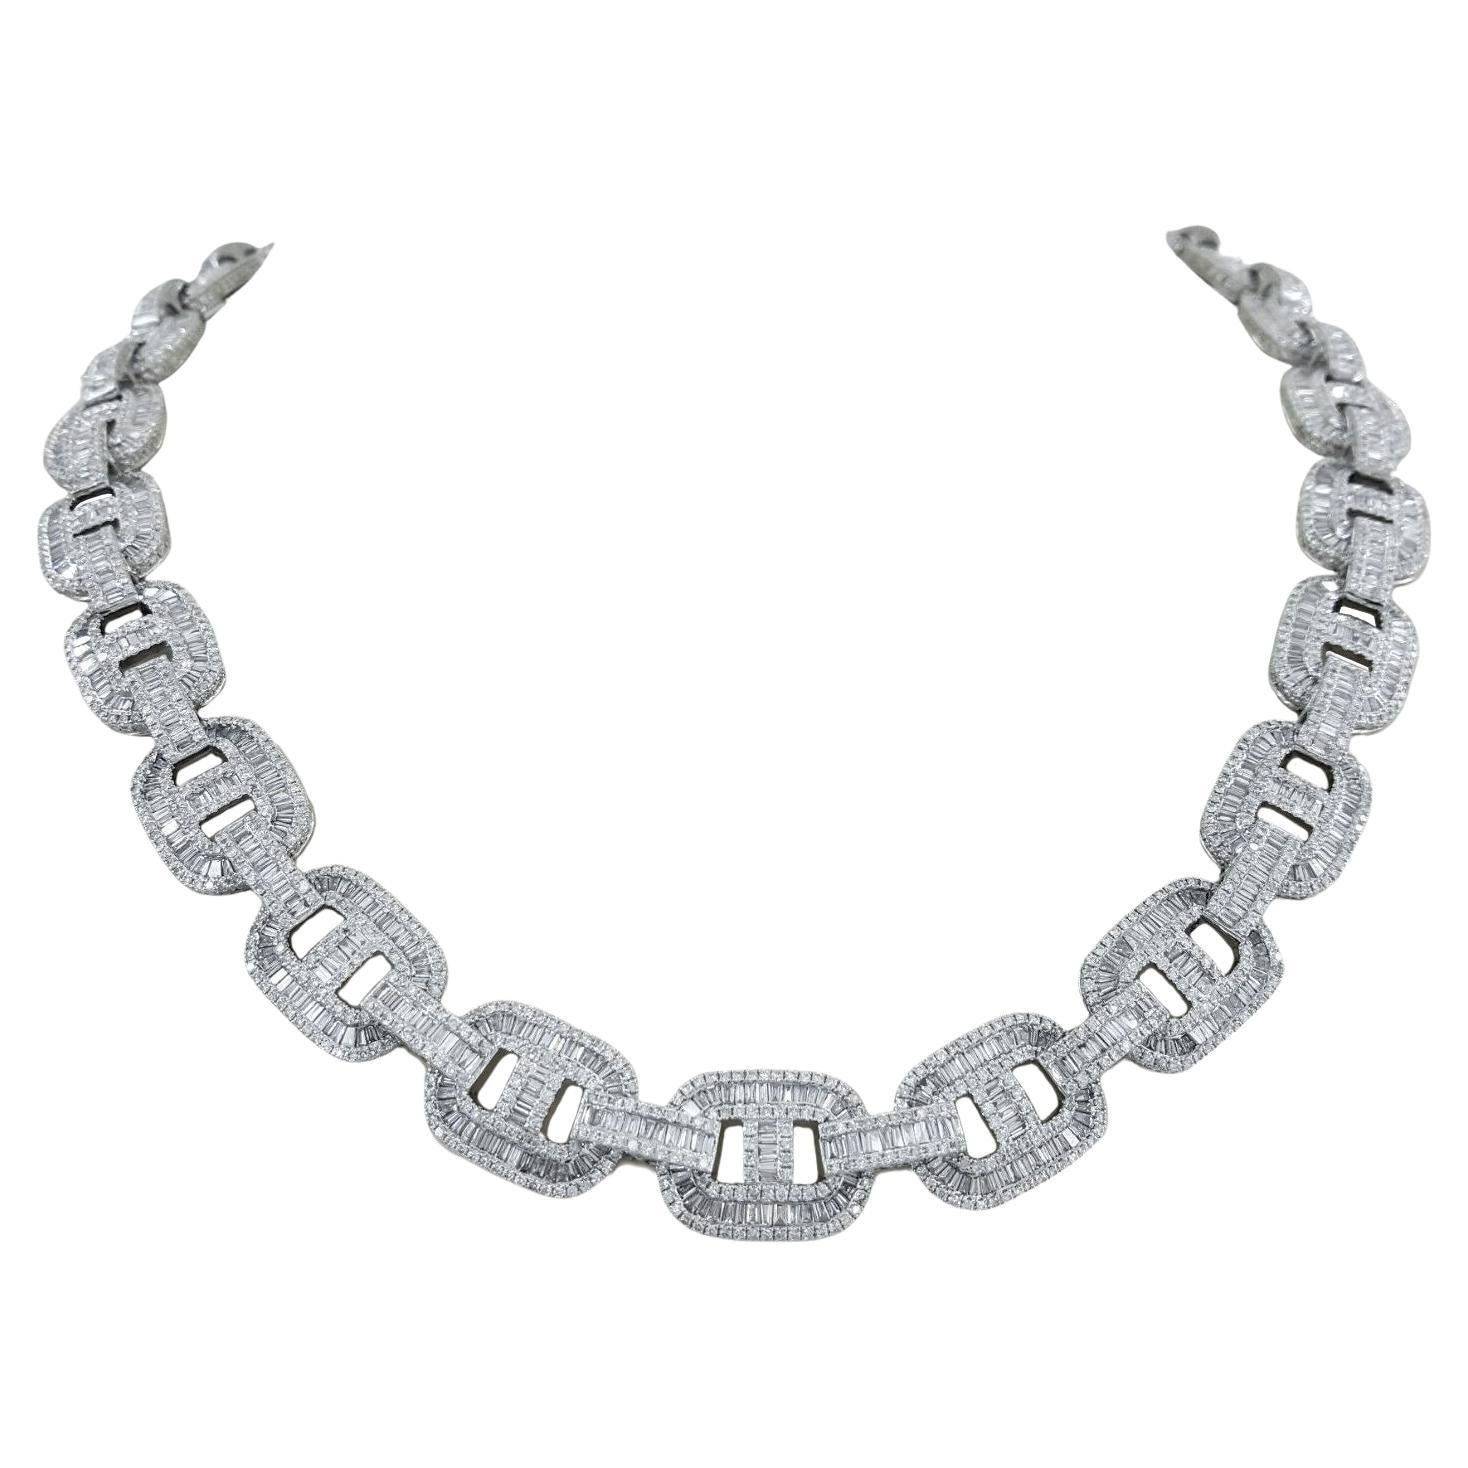 38 Carat Round and Baguette Diamond Necklace